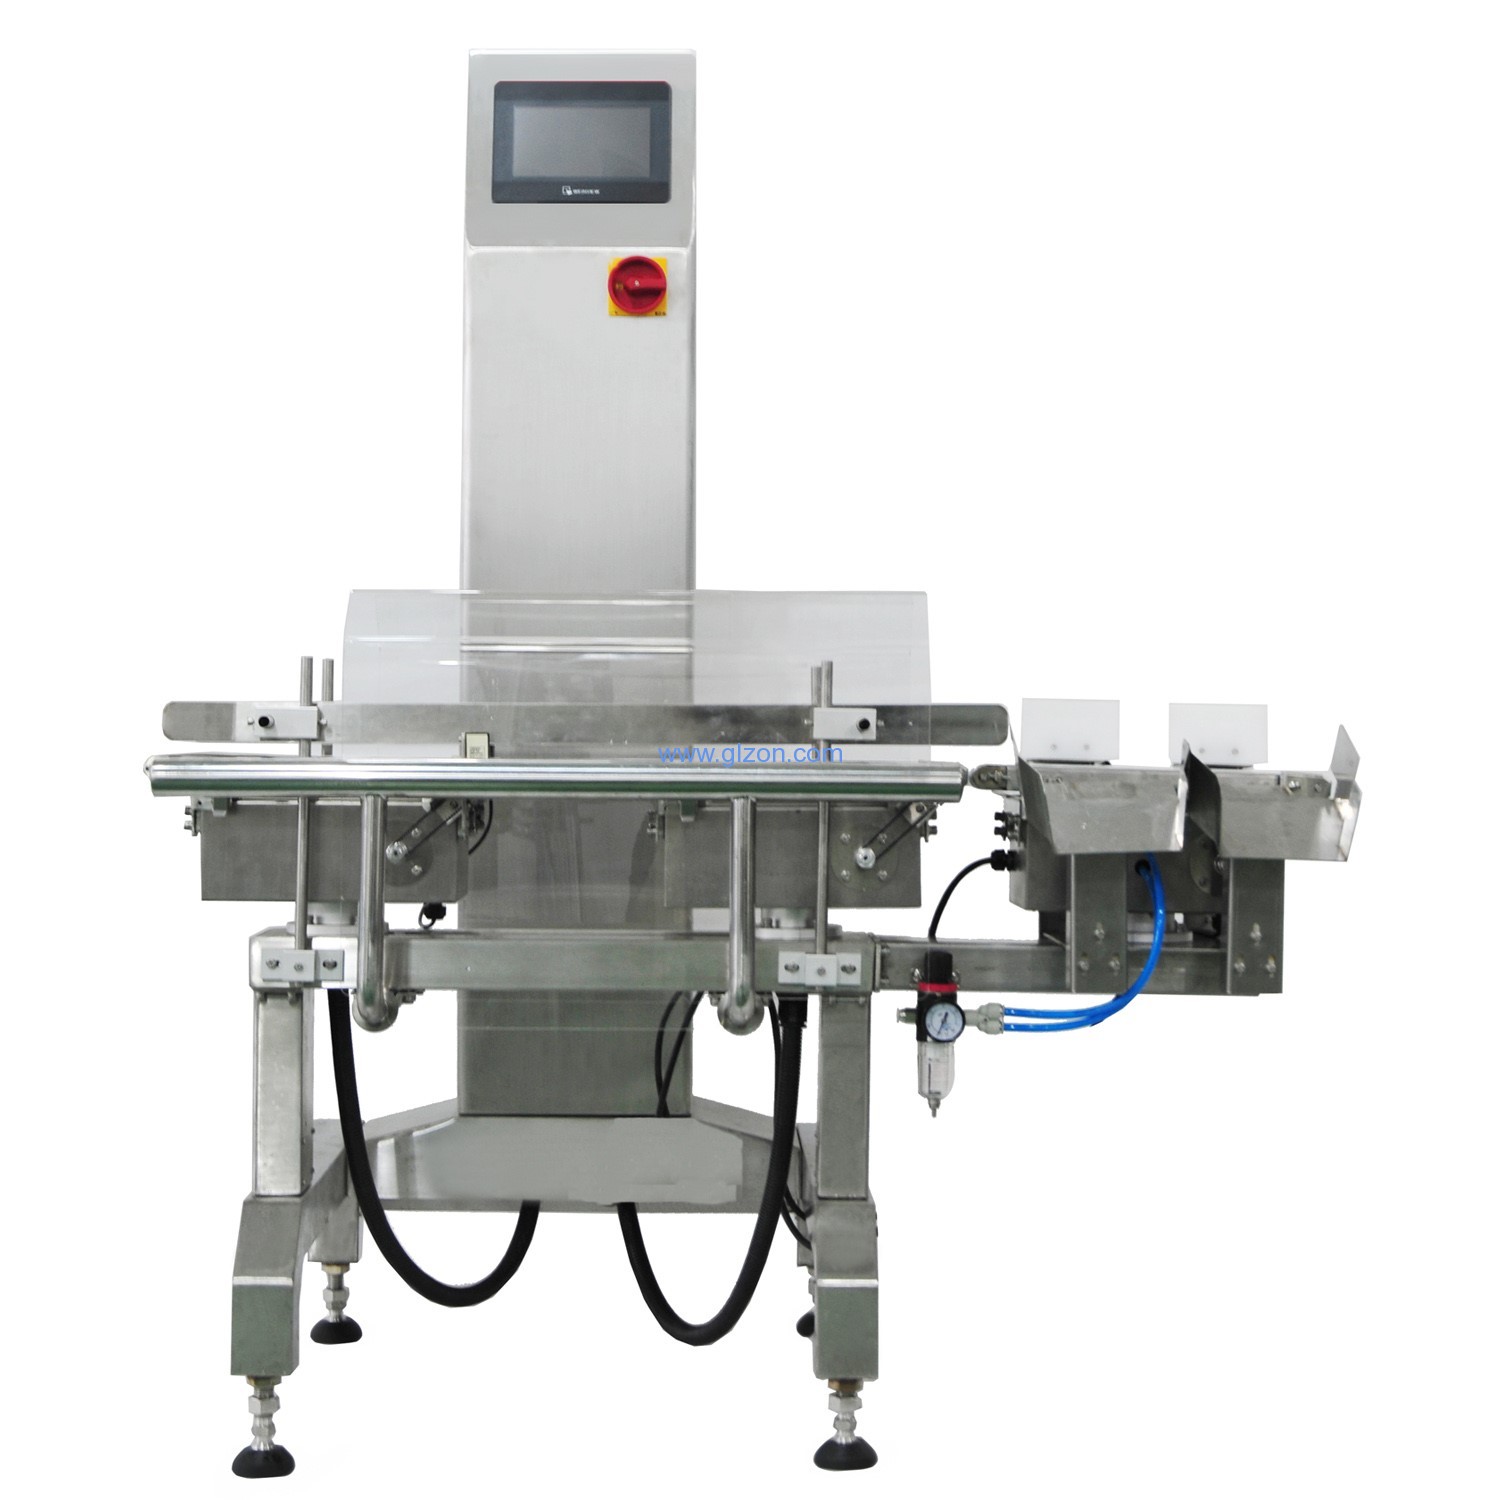 CCK-300 weighing and sorting machine